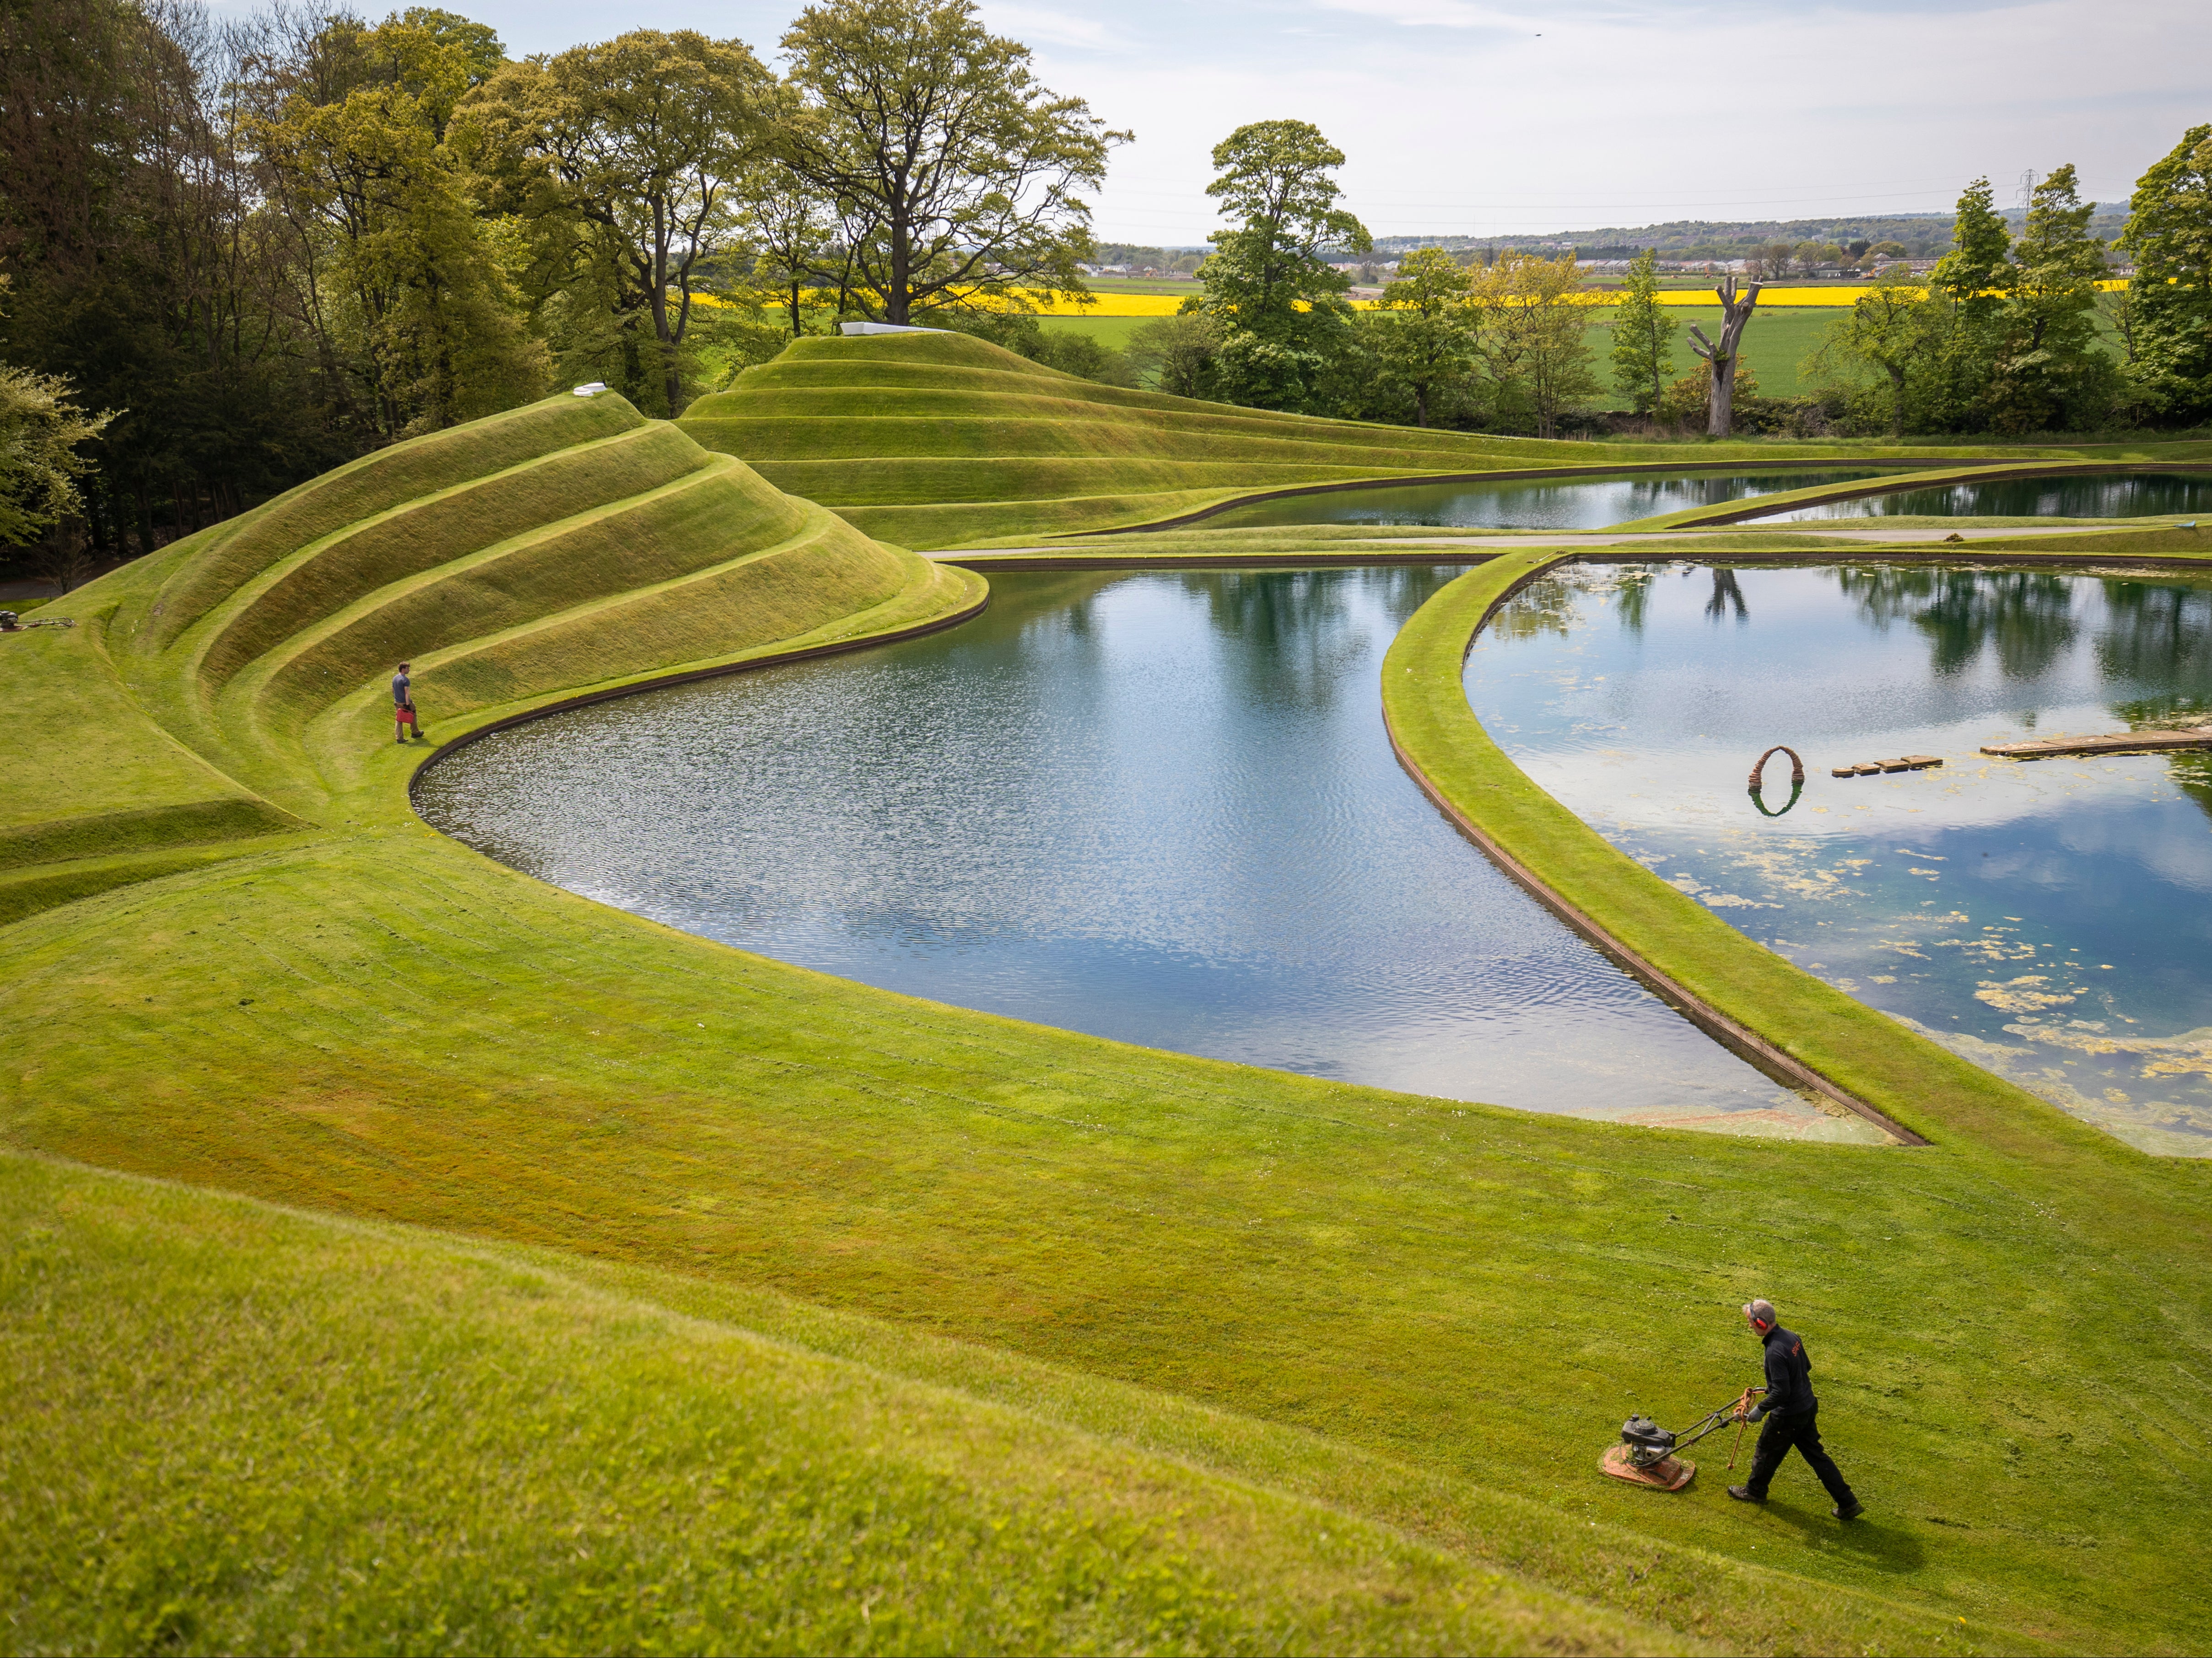 Gardeners mow the grass on the Cells of Life landforms, created by landscape architect Charles Jeneks, which is one of the site-specific sculptures in the grounds of Jupiter Artland